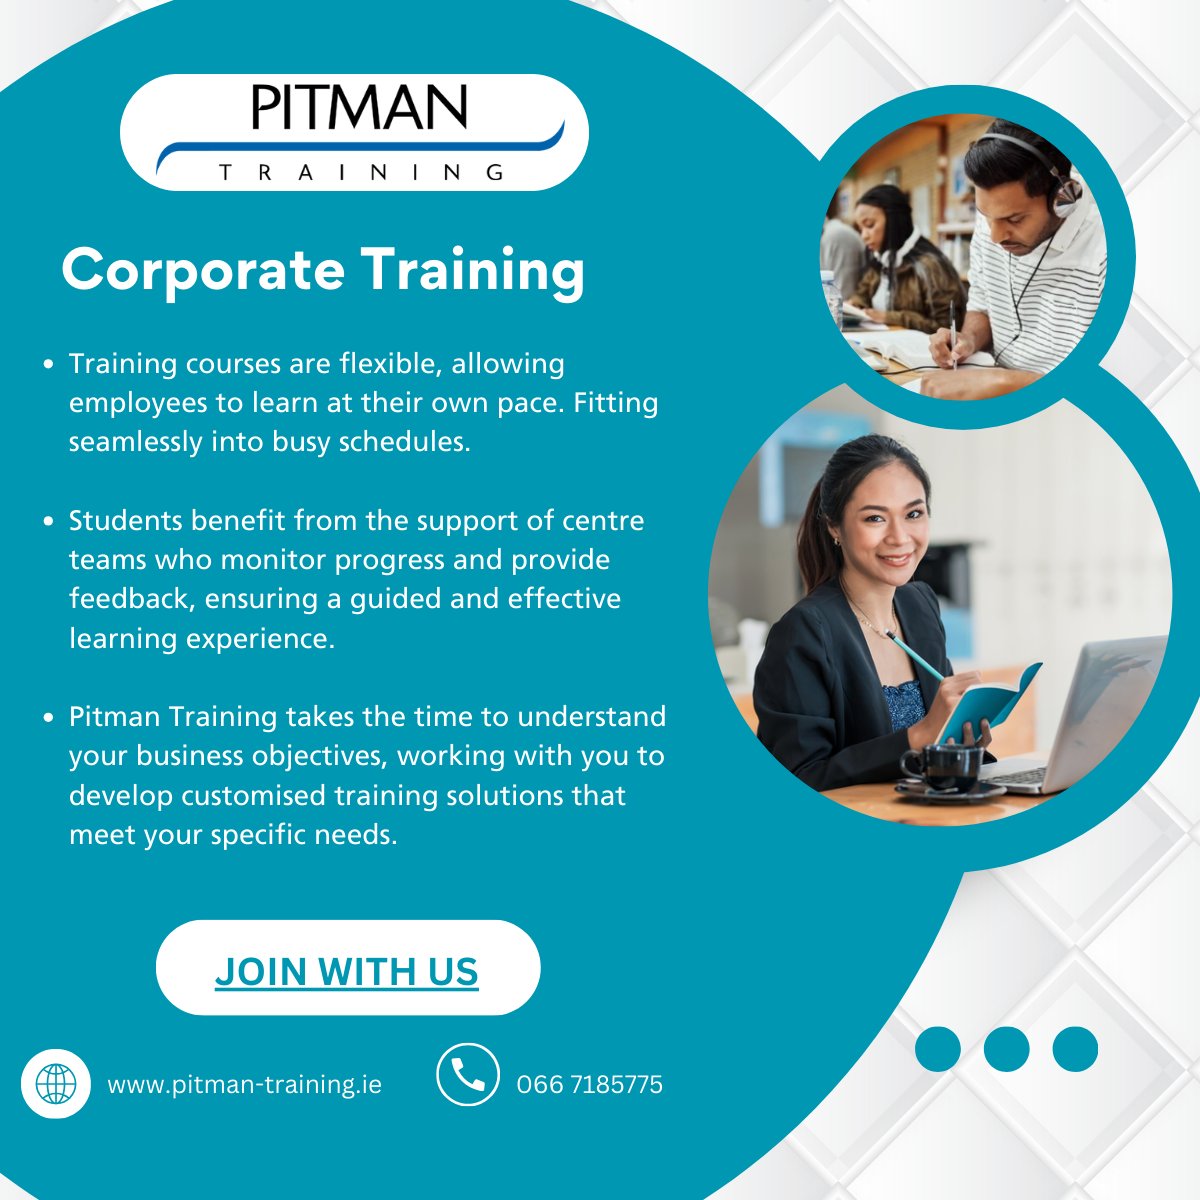 Empower your employees with flexible courses from Pitman Training. Benefit from dedicated support and customised solutions to meet your business goals. Visit pitman-training.ie or call 066 7185775 to learn more. #CorporateTraining #EmployeeDevelopment